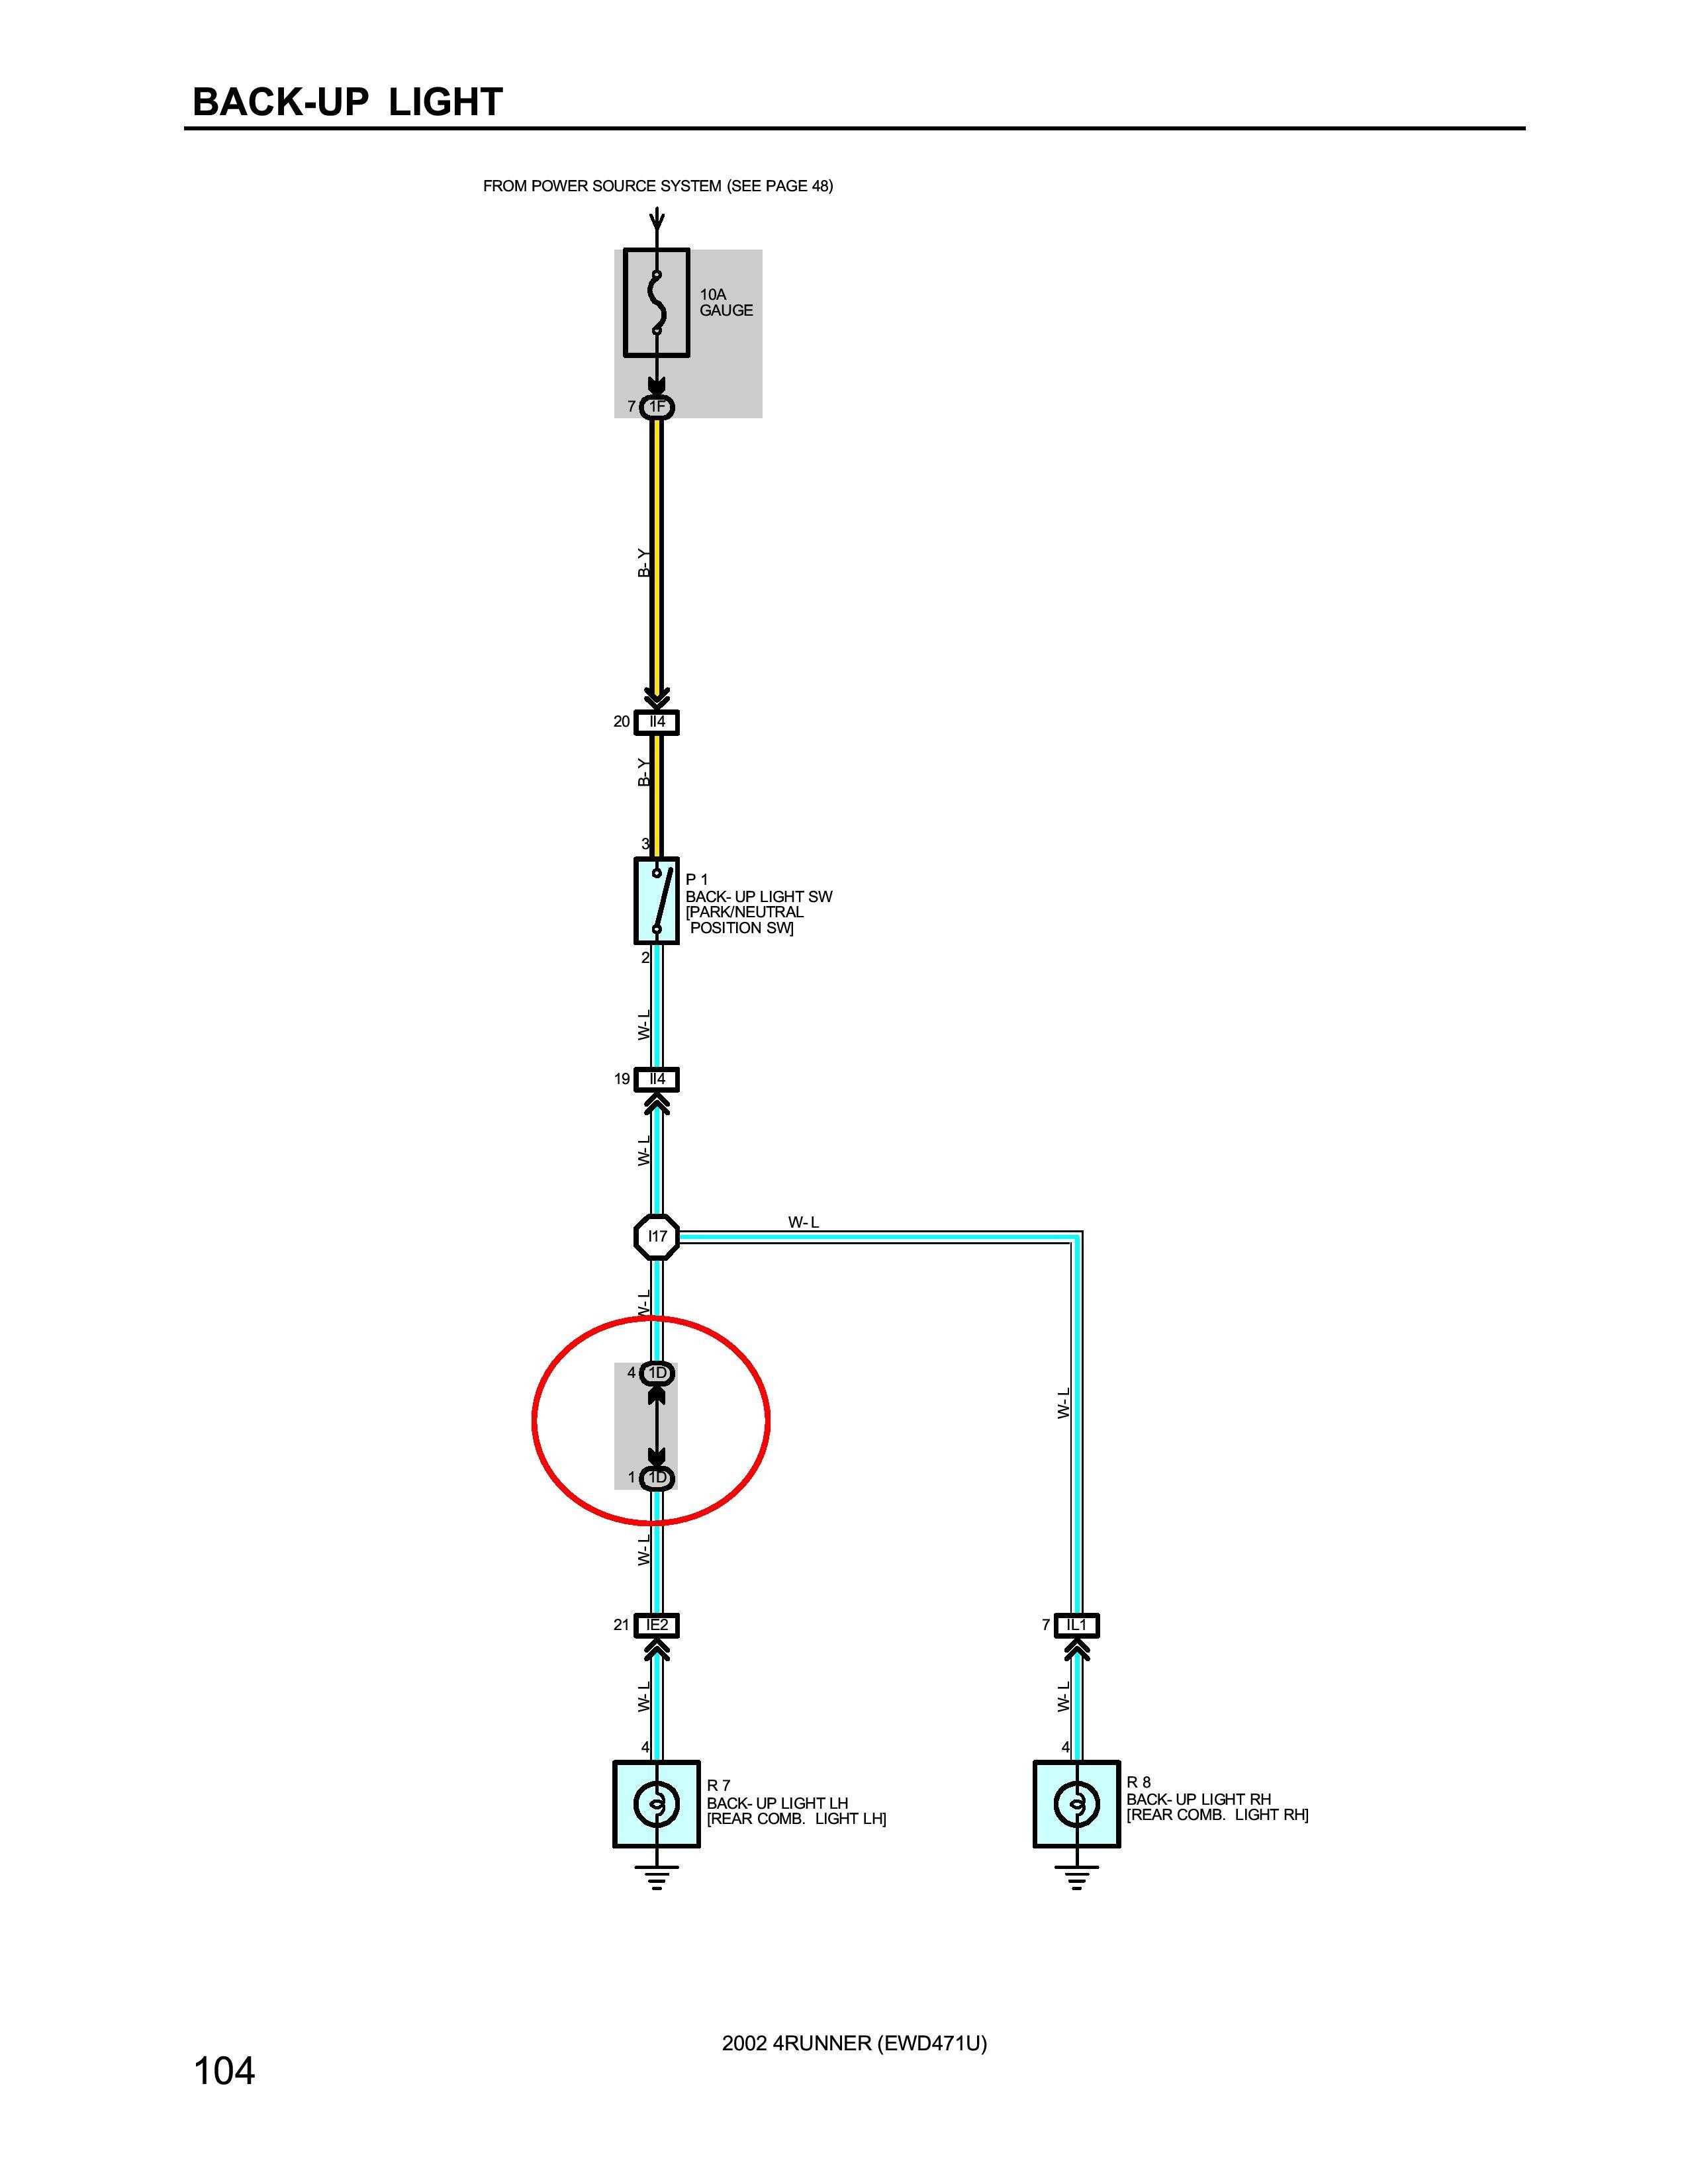 Wiring Diagram For Rear View Camera Save Unique Voyager Backup